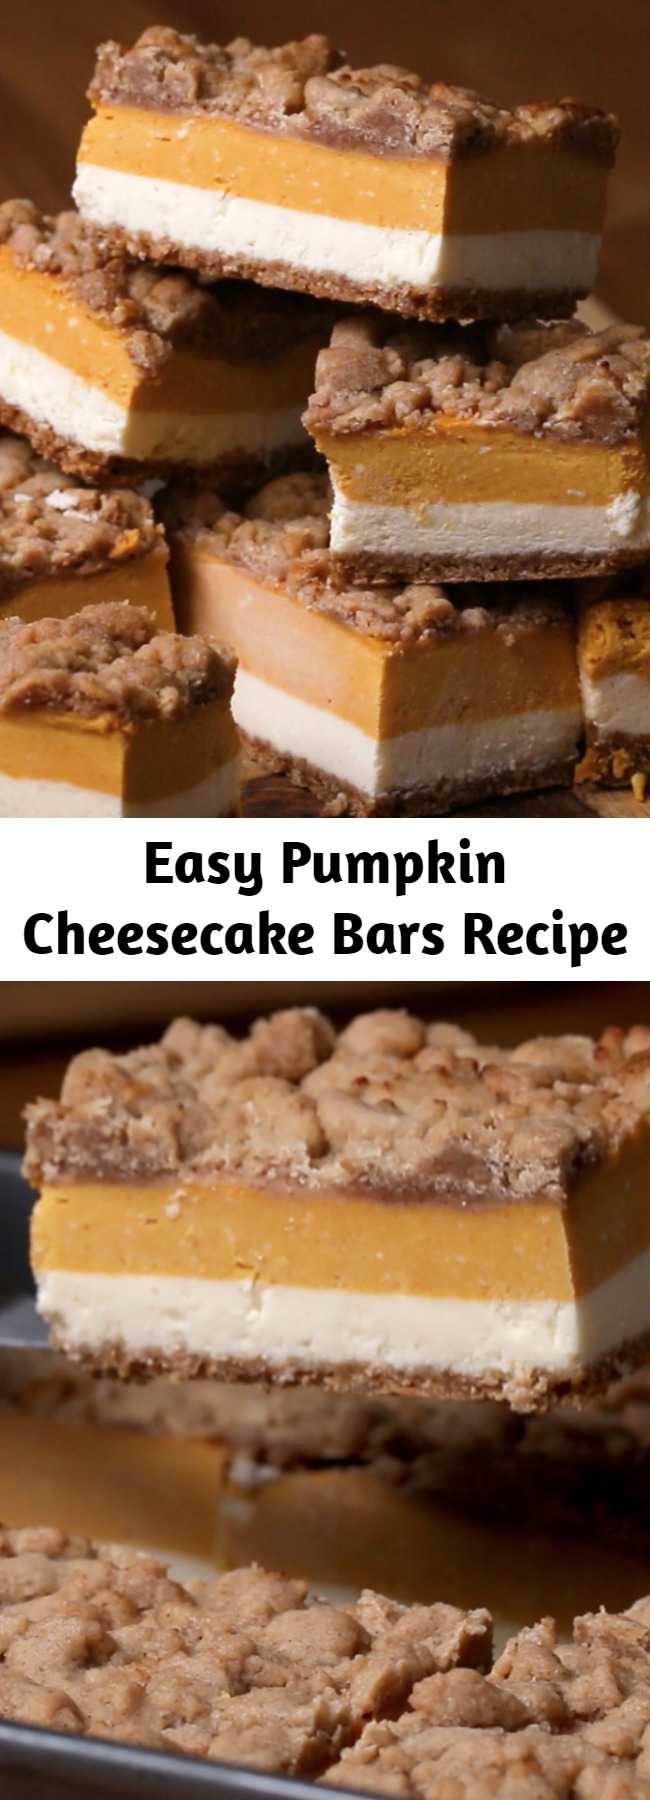 Easy Pumpkin Cheesecake Bars Recipe - Will make for a super tasty sweet treat during the fall and holiday season. This perfect Pumpkin Cheesecake Bars is delicious and very good! Perfect Thanksgiving Dessert! #pumpkin #cheesecake #fall #fall #recipe